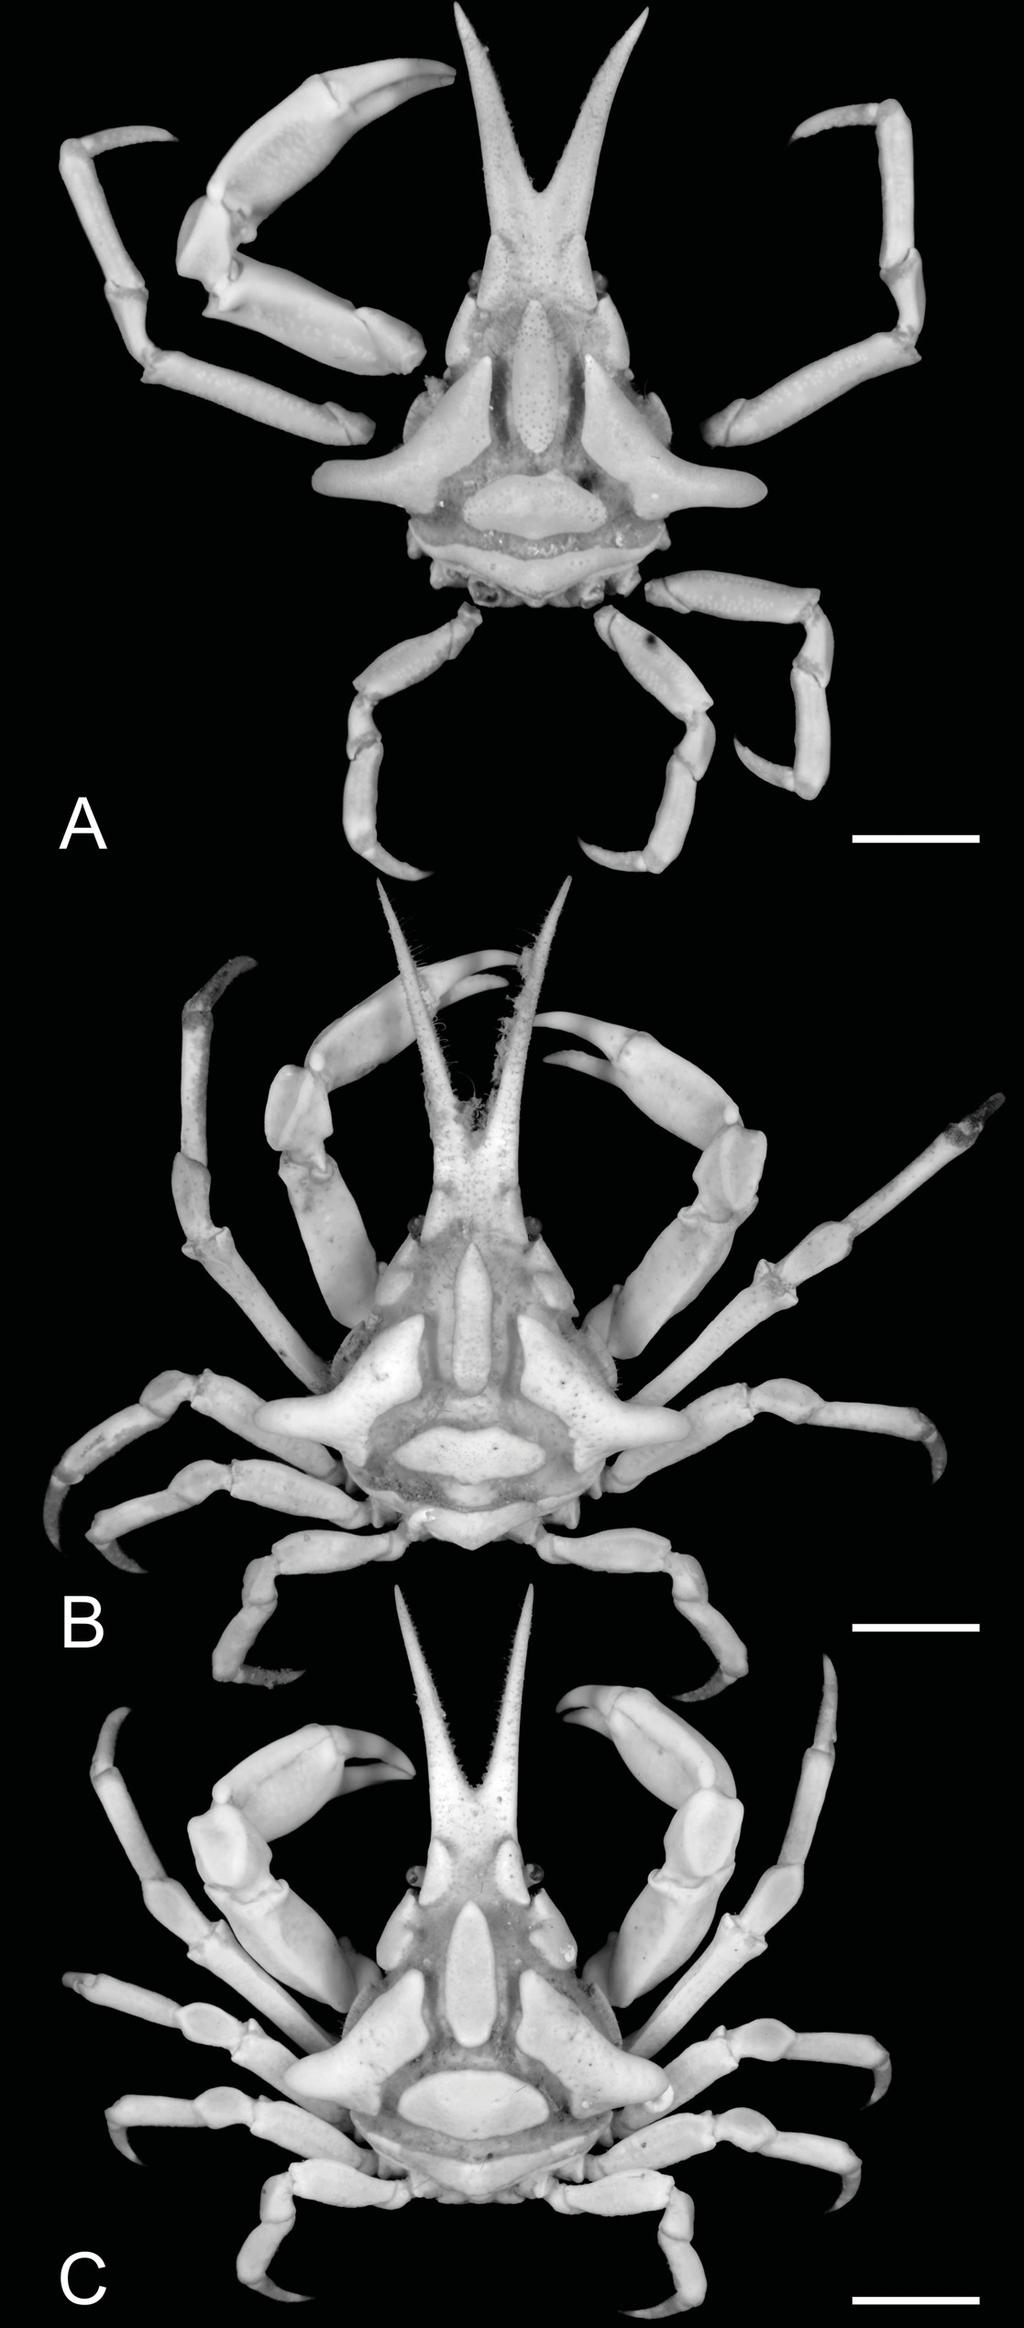 European Journal of Taxonomy 358: 1 37 (2017) Fig. 2. Oxypleurodon stimpsoni Miers, 1885, overall dorsal view. A. (14.0 9.